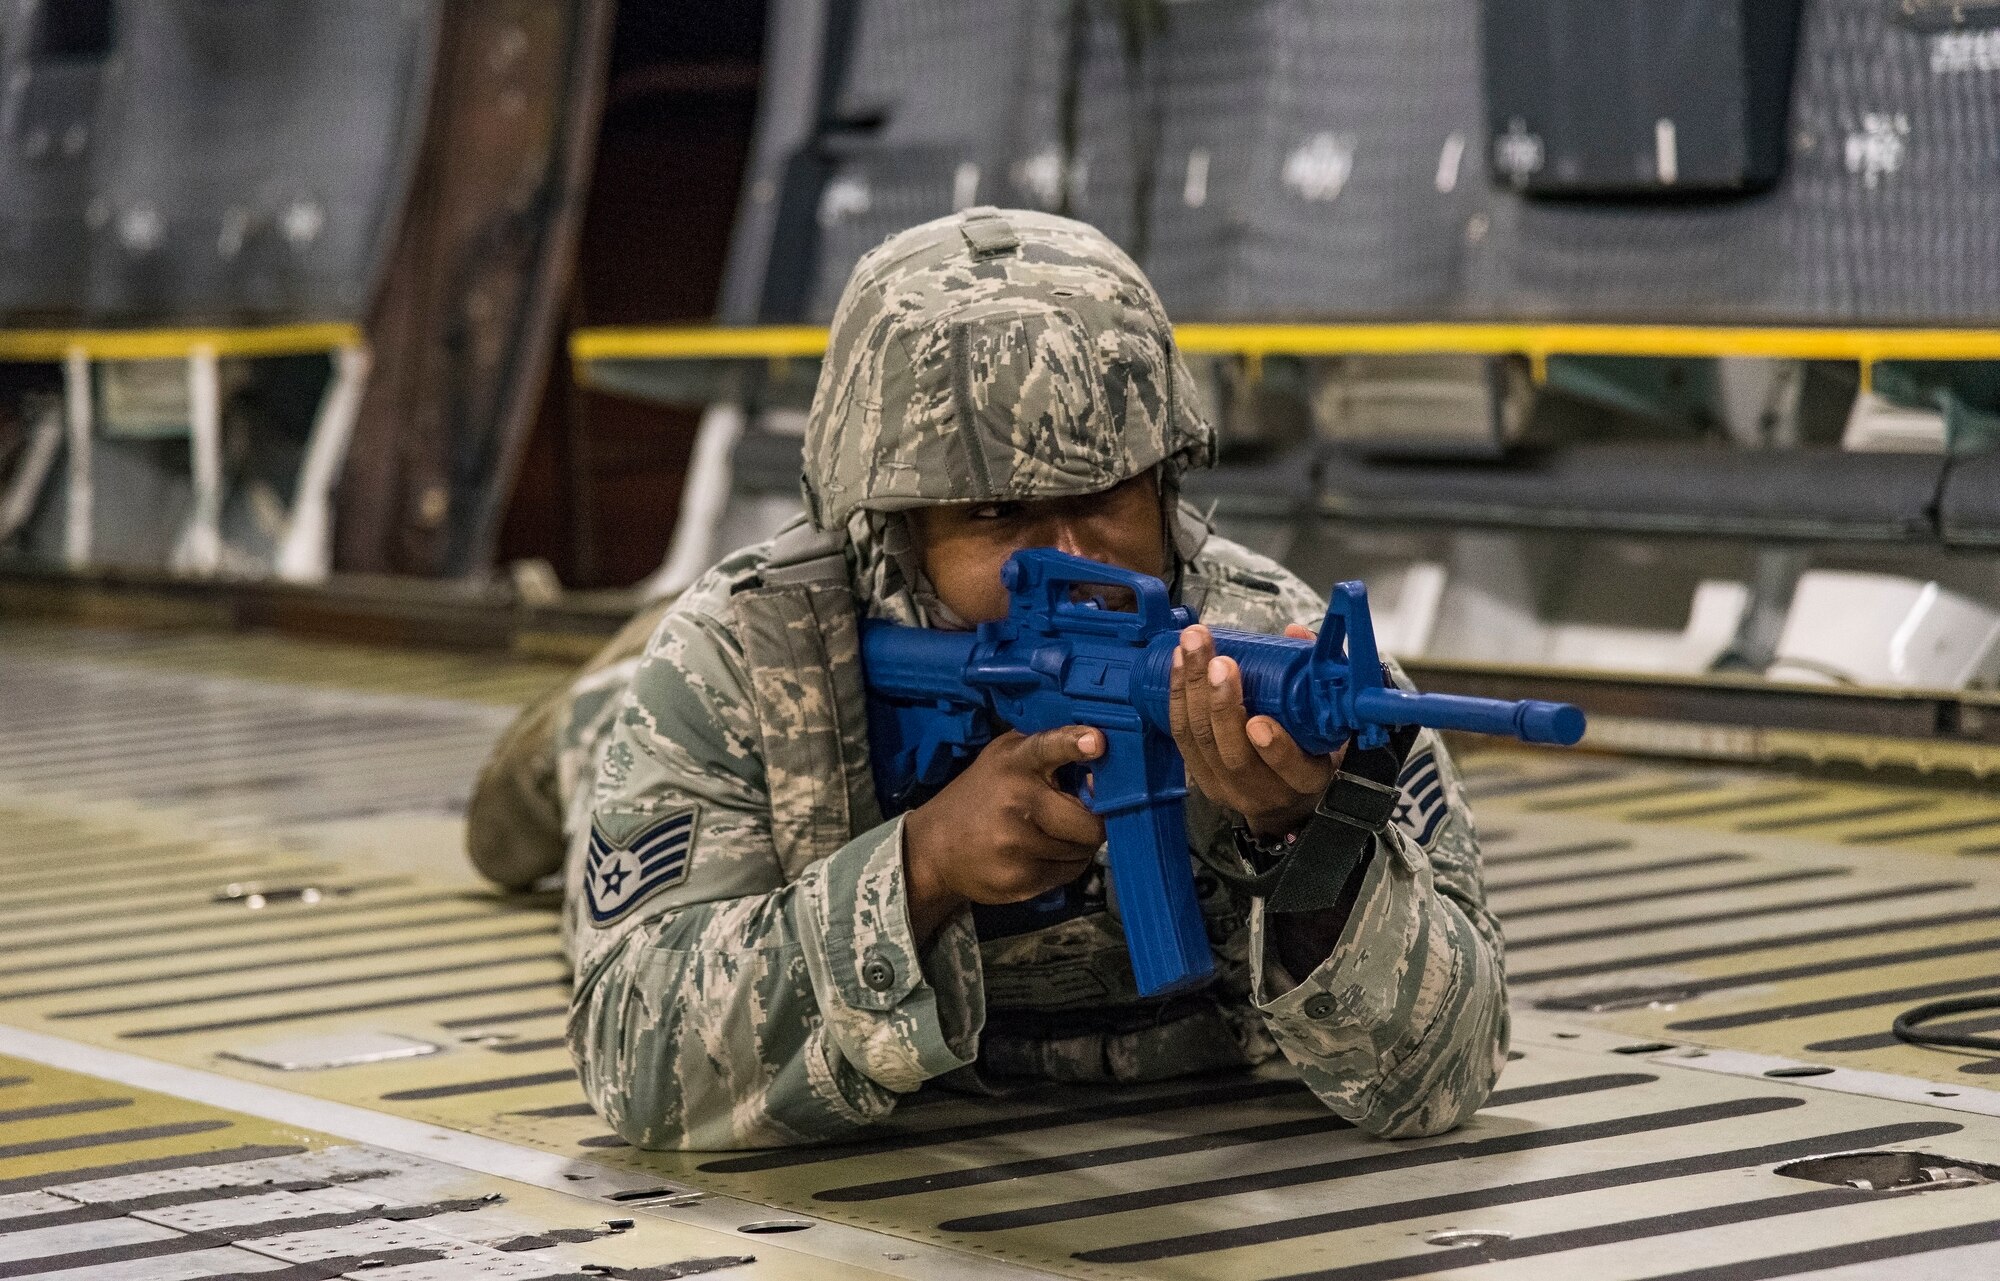 Staff Sgt. Allen Riley, 436th Security Forces Squadron response force leader, takes a prone position on the floor of a C-5M Super Galaxy cargo compartment after entering the aircraft from a rear door Sept. 17, 2018, on Dover Air Force Base, Del. Riley and other response force members located and neutralized the mock hijacker who was holding mock hostages in the aircraft’s troop compartment. (U.S. Air Force photo by Roland Balik)